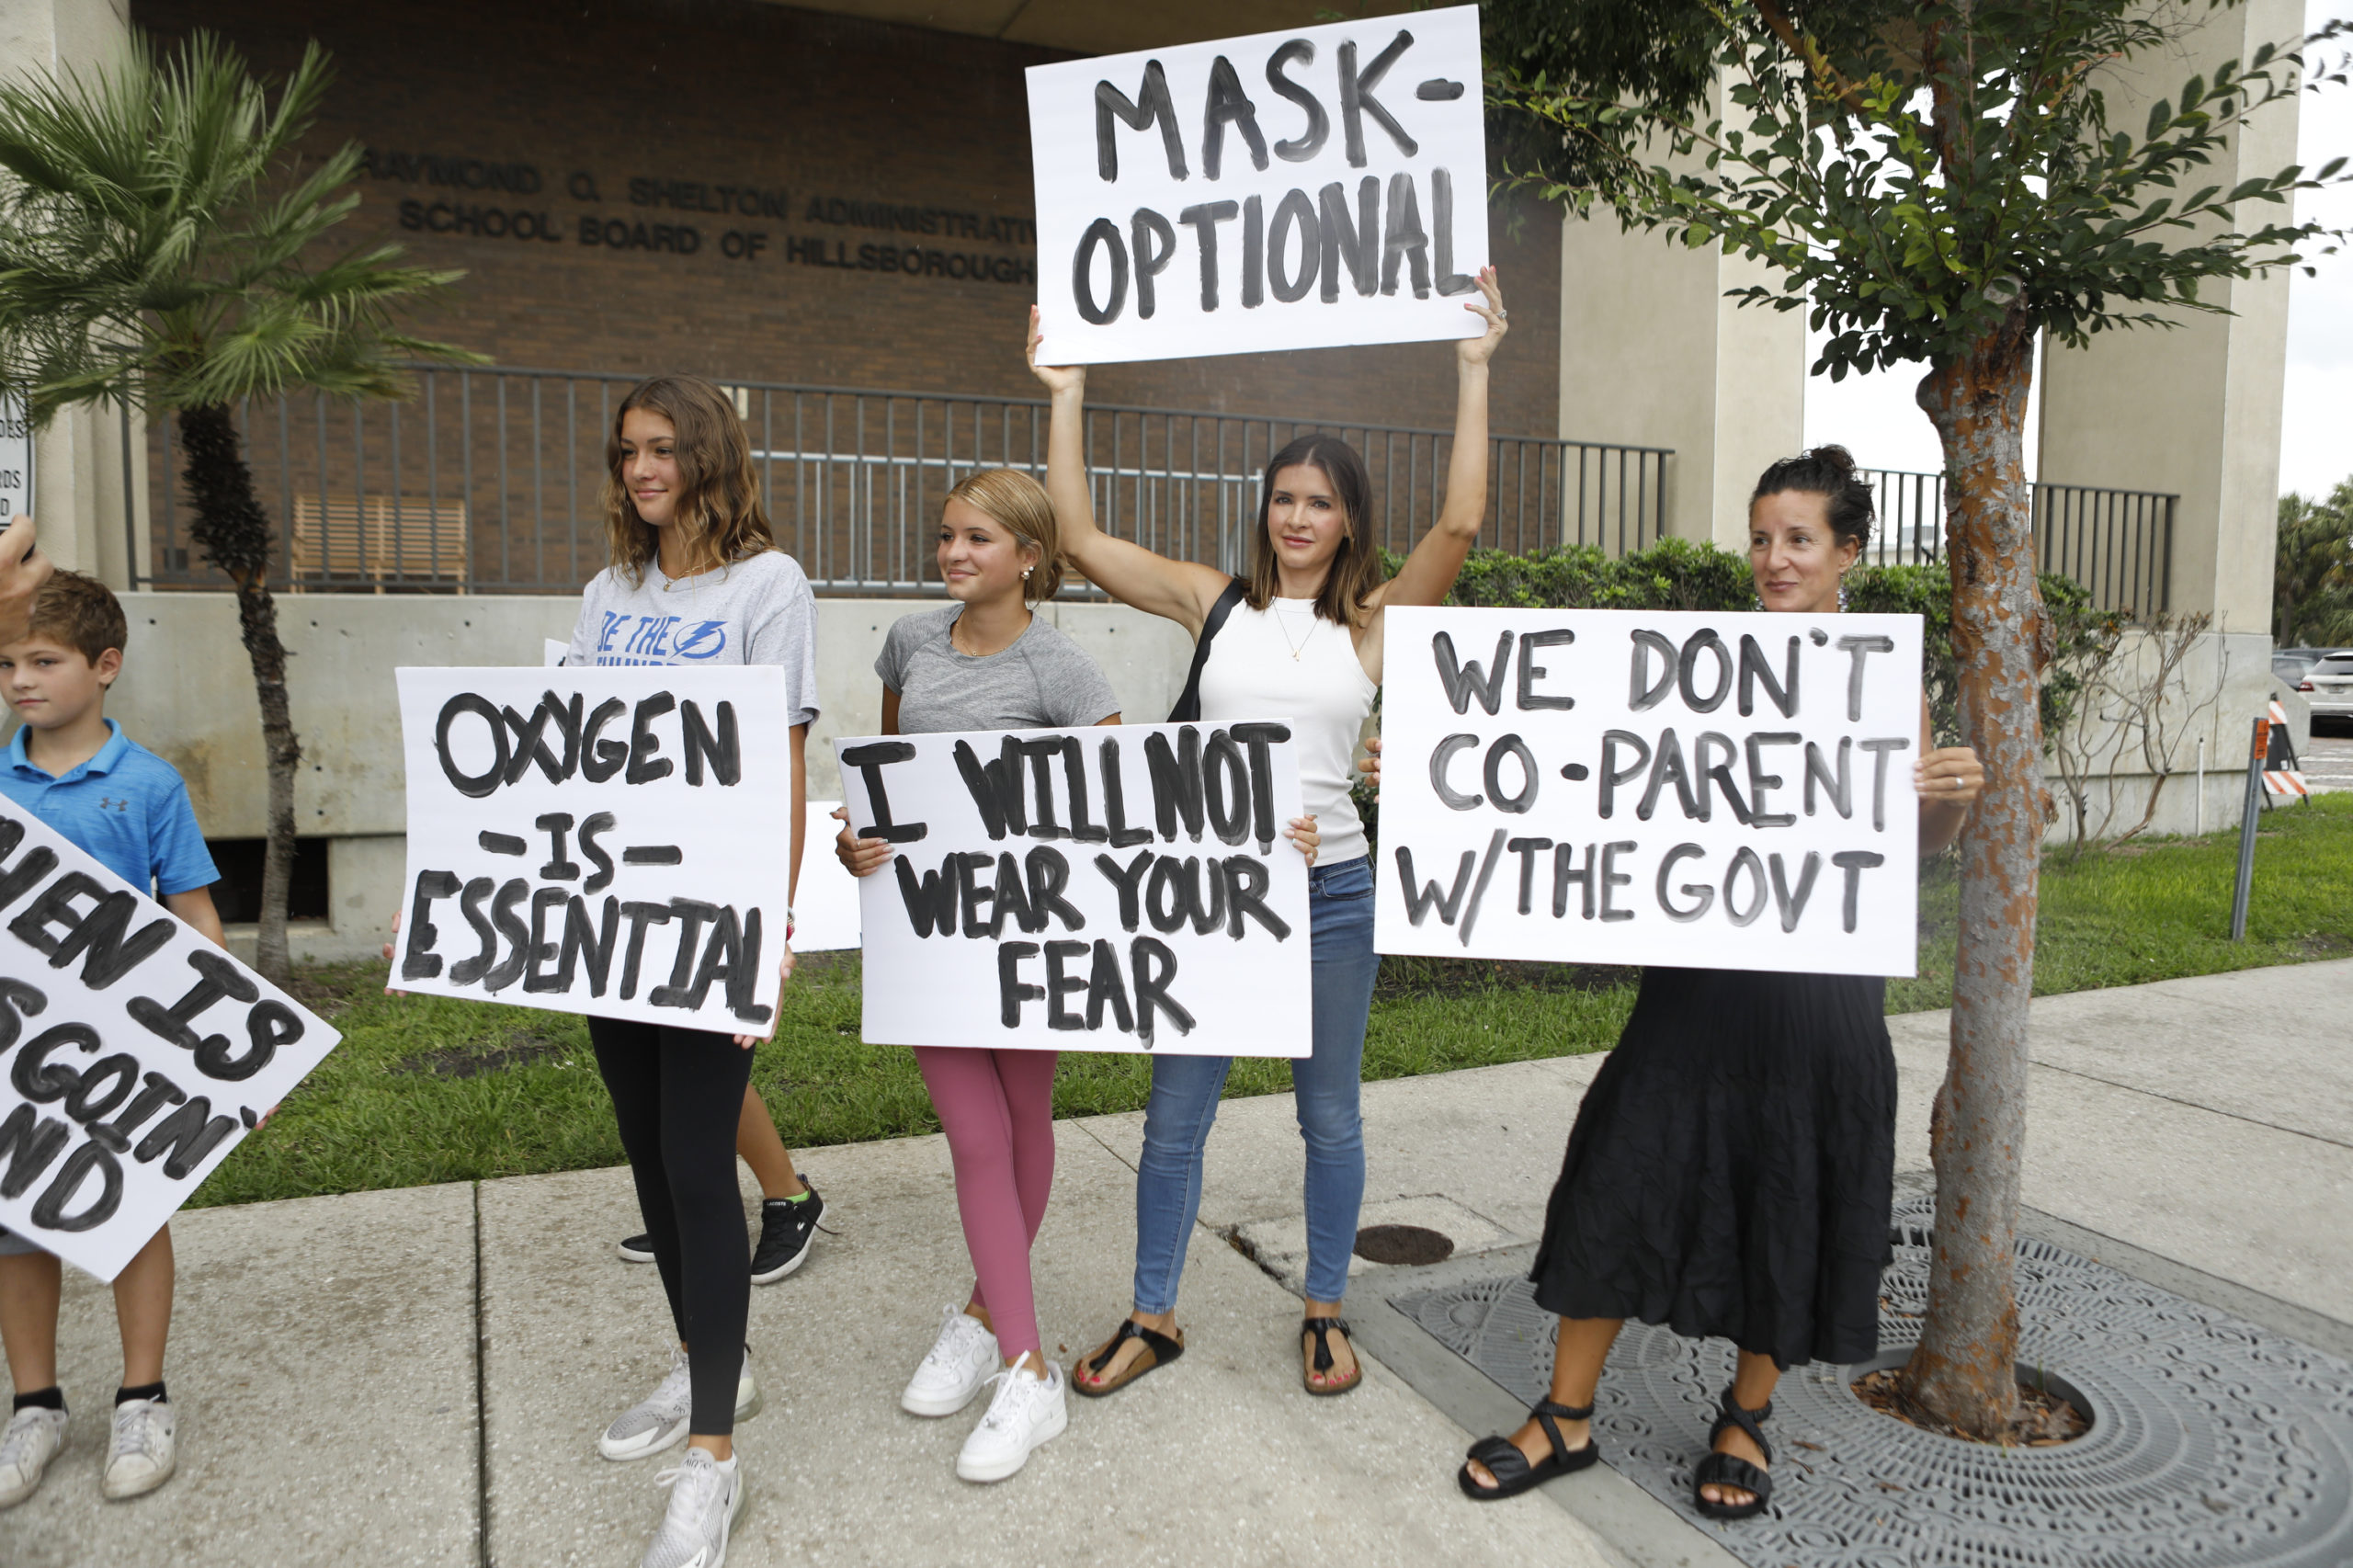  Families protest any potential mask mandates before the Hillsborough County Schools Board meeting held at the district office on July 27, 2021 in Tampa, Florida. The Centers for Disease Control and Prevention recommended those who are vaccinated should wear masks indoors including students returning to school. (Photo by Octavio Jones/Getty Images)